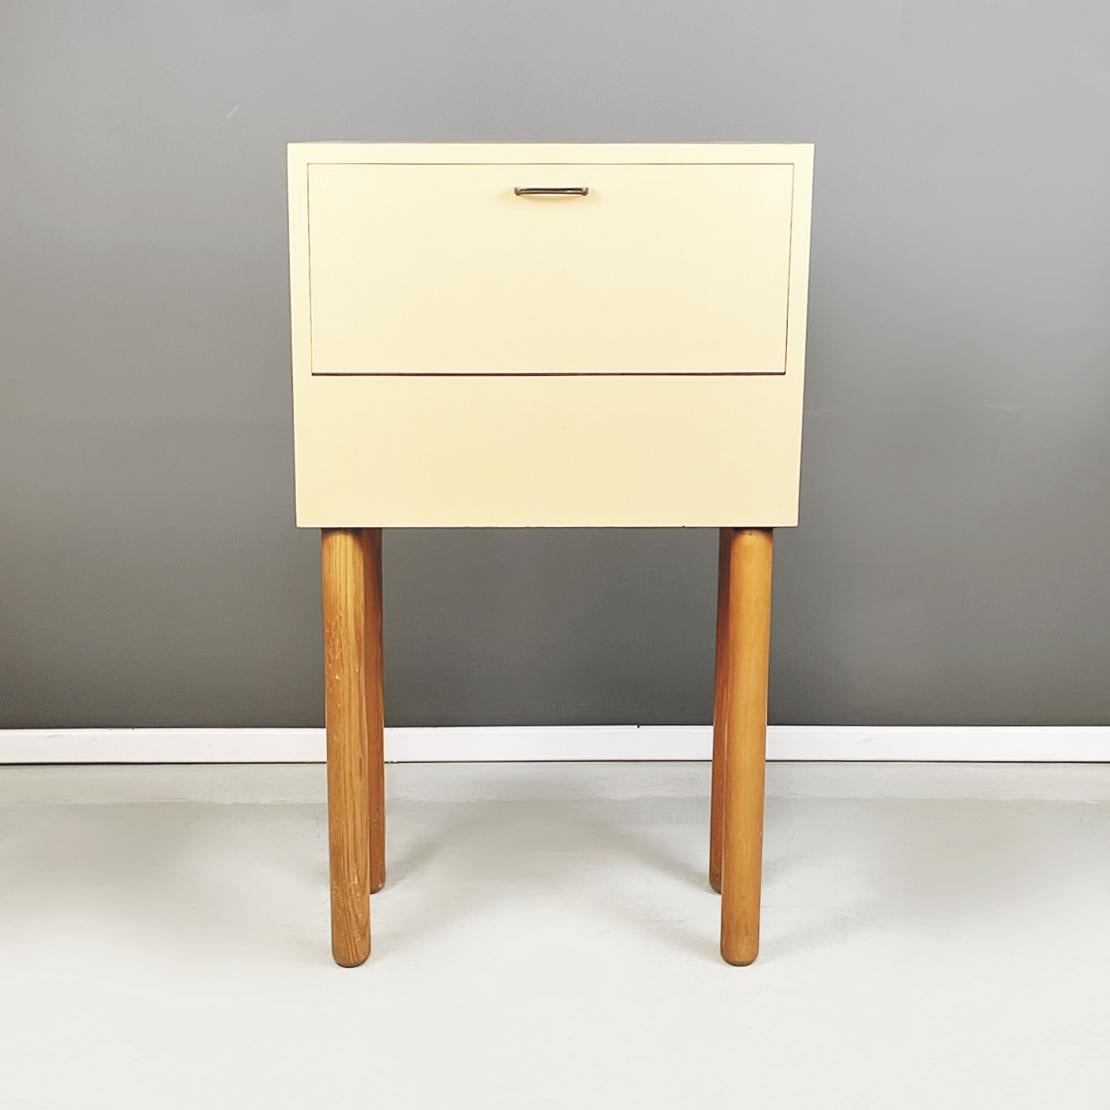 Italian mid-century modern Sideboard or bar cabinet in beige formica and wood, 1960s
Sideboard or bar cabinet with rectangular base in wood and beige Formica. This highboard features a Formica compartment with a flap opening and metal handle. The